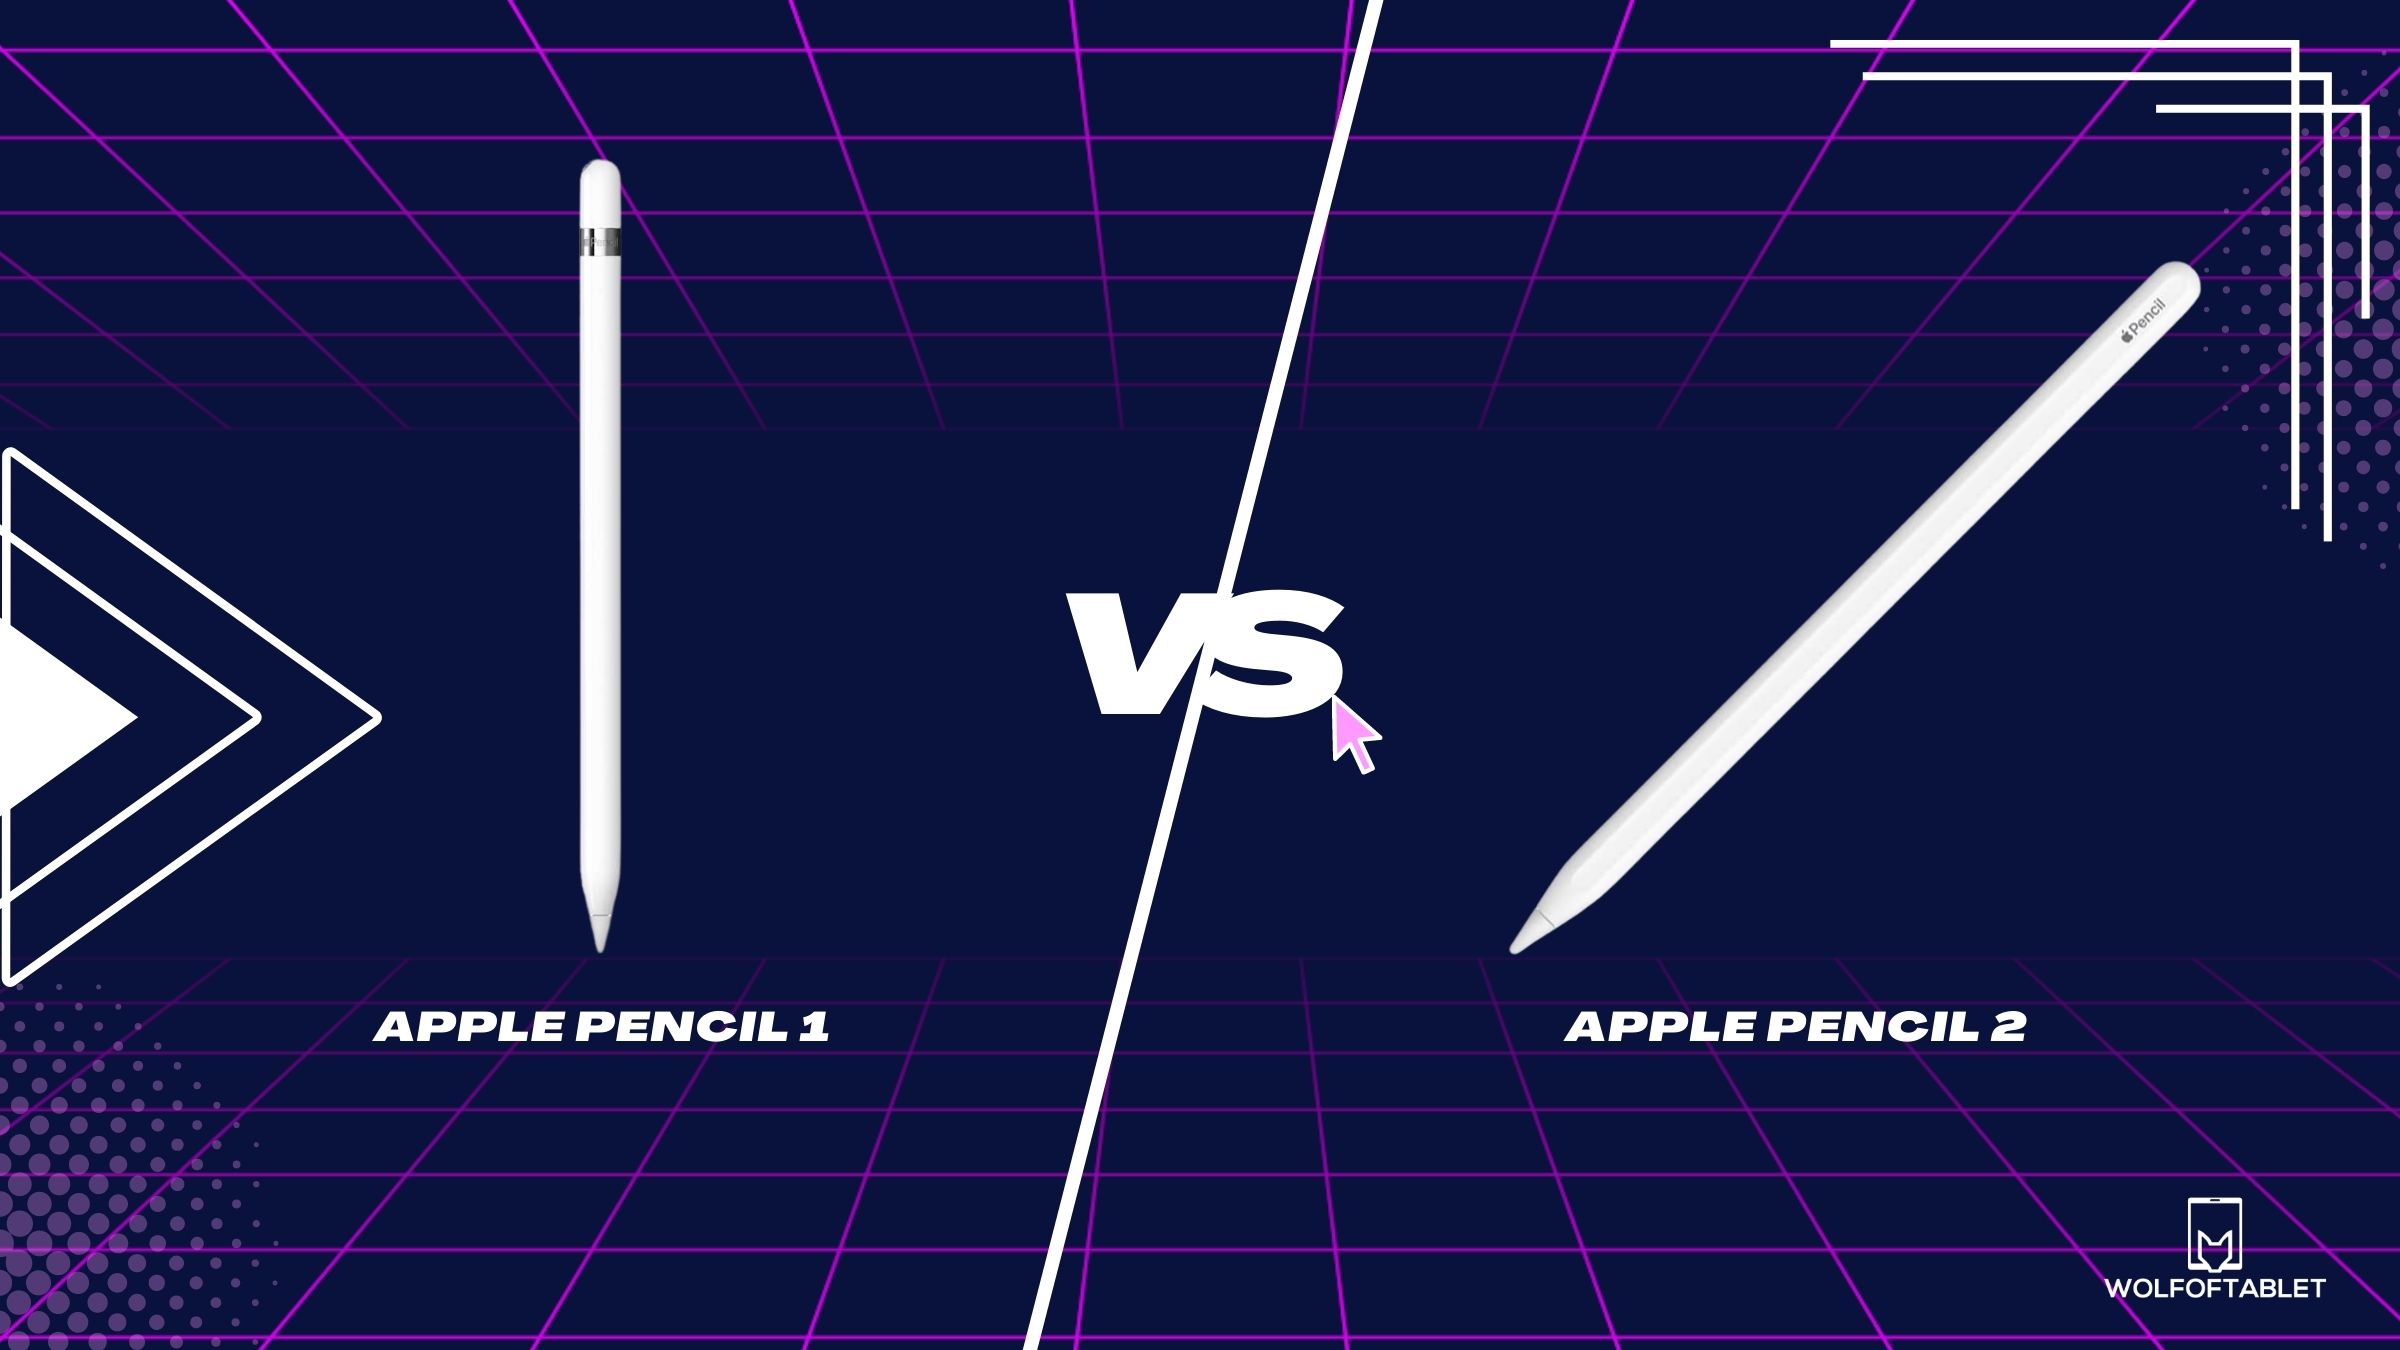 Apple Pencil 1 vs 2 Compared - find out 5 key differences